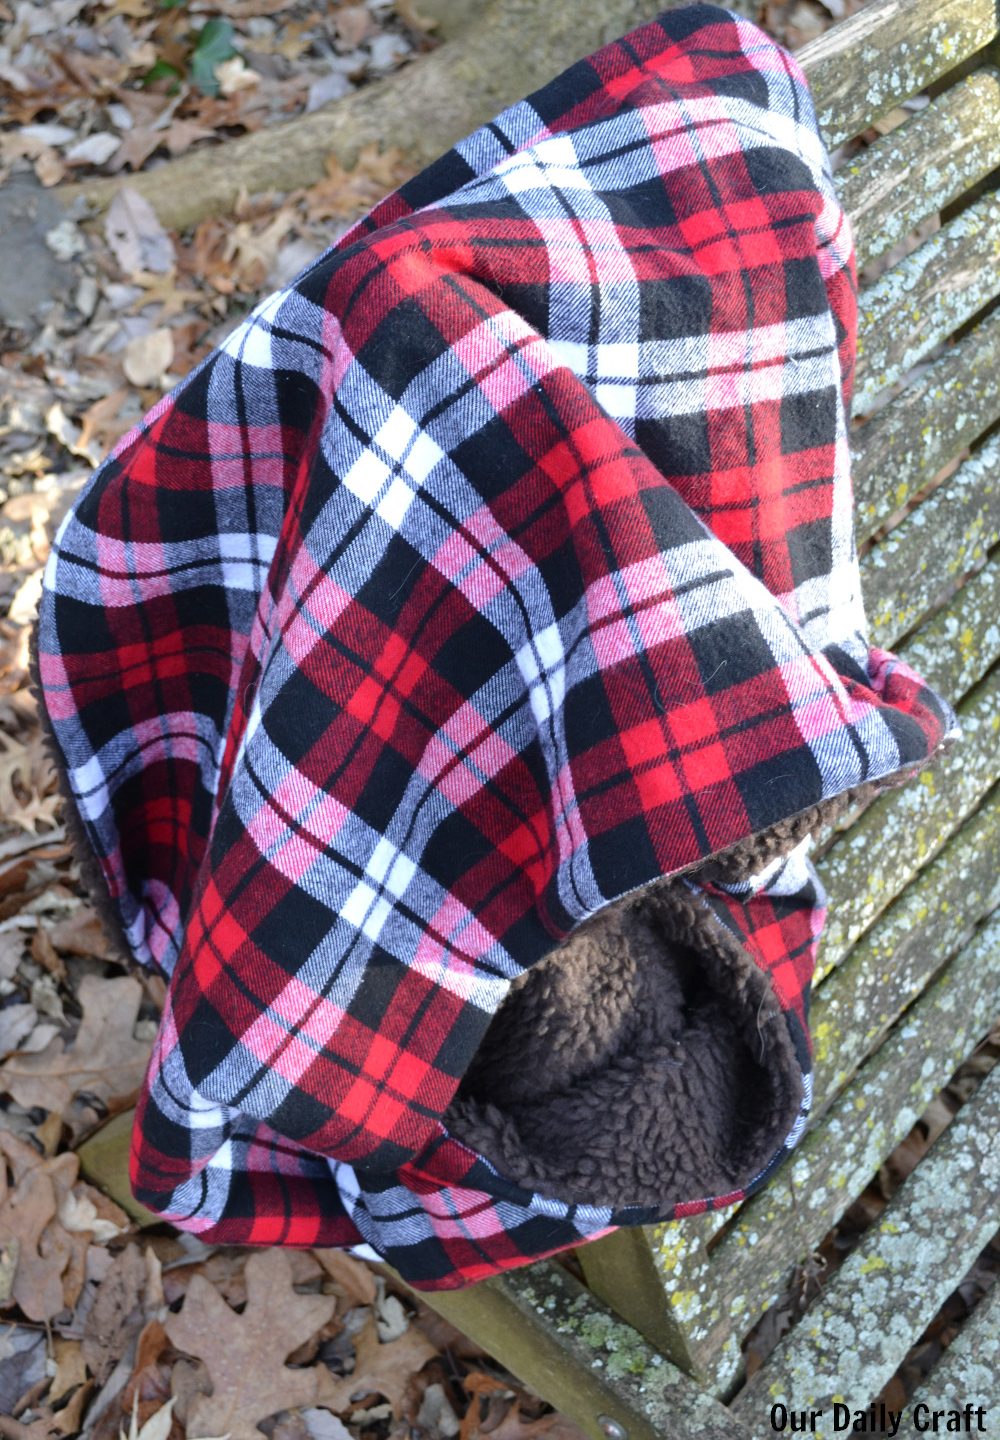 Sew an Infinity Scarf with Sherpa Fabric and Plaid Flannel